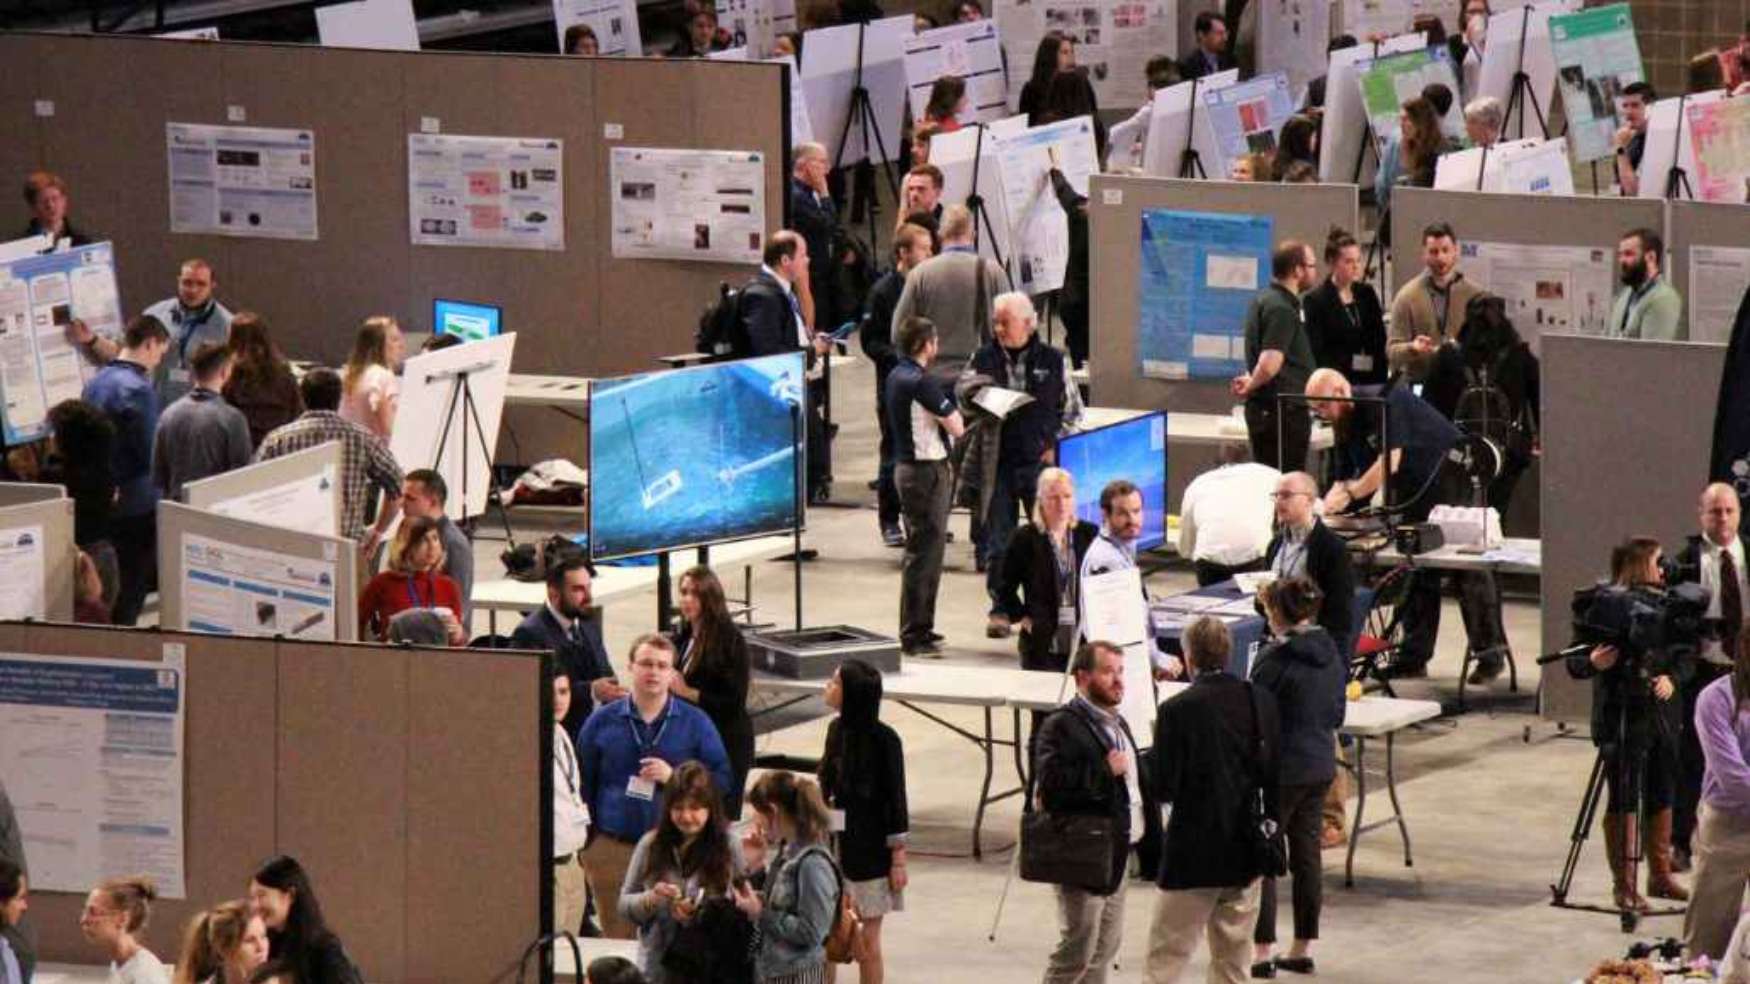 Image of people giving poster presentations at the UMaine Student Symposium.